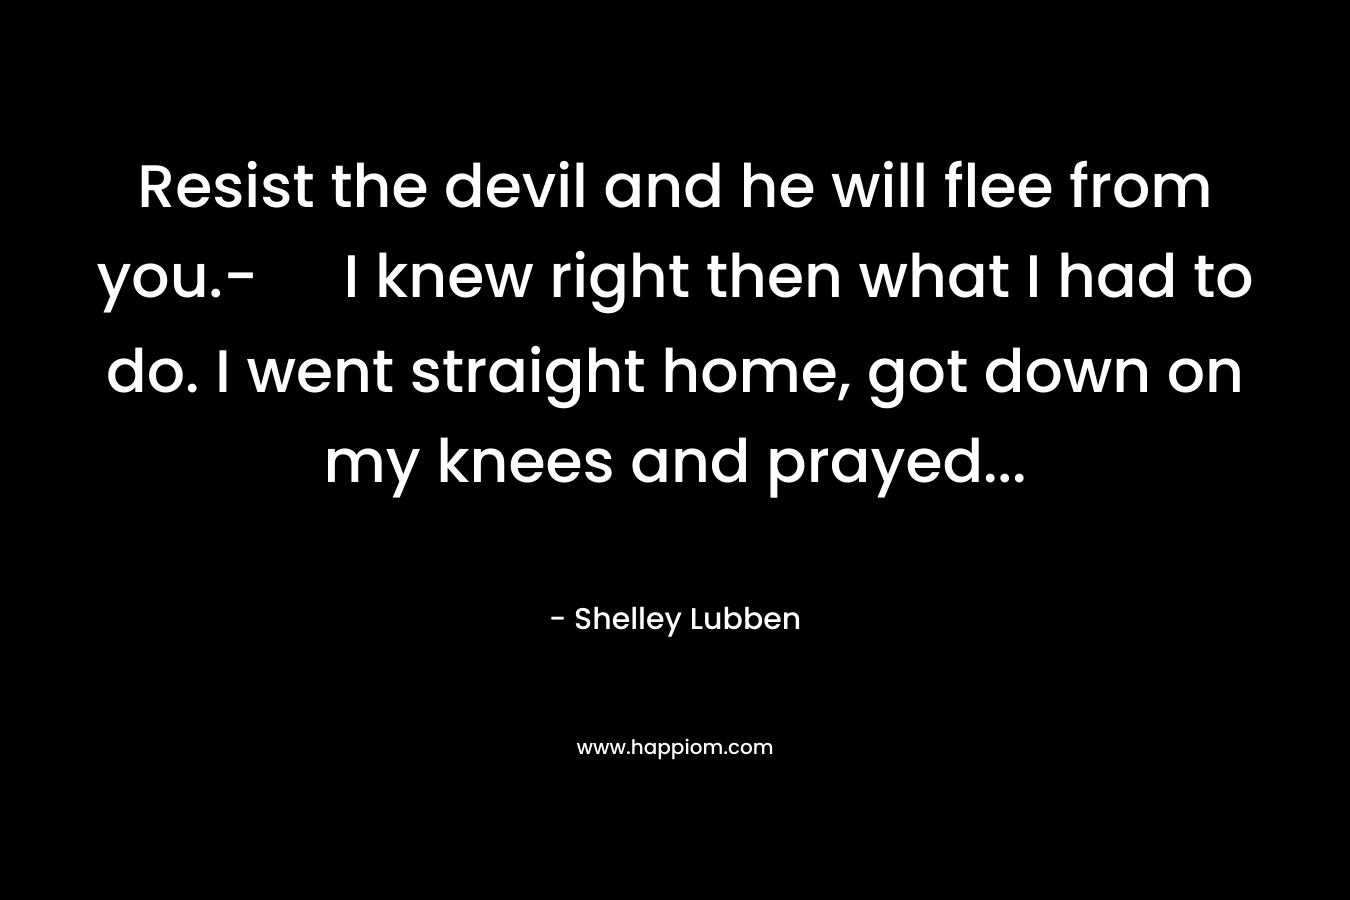 Resist the devil and he will flee from you.- I knew right then what I had to do. I went straight home, got down on my knees and prayed… – Shelley Lubben